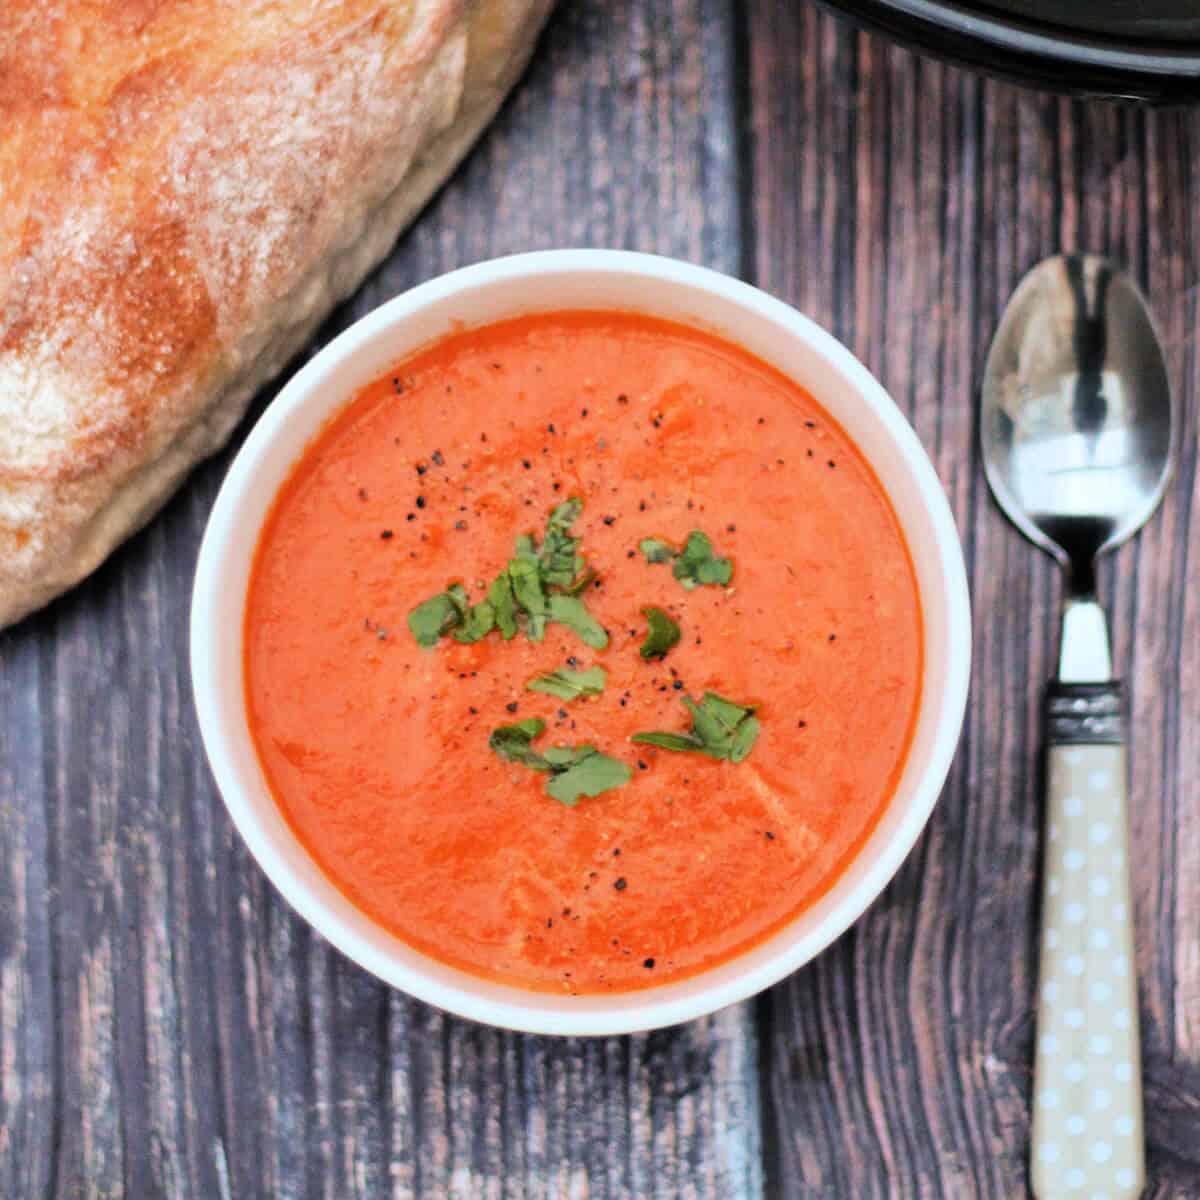 Bowl of tomato soup with basil, bread and spoon to the side.